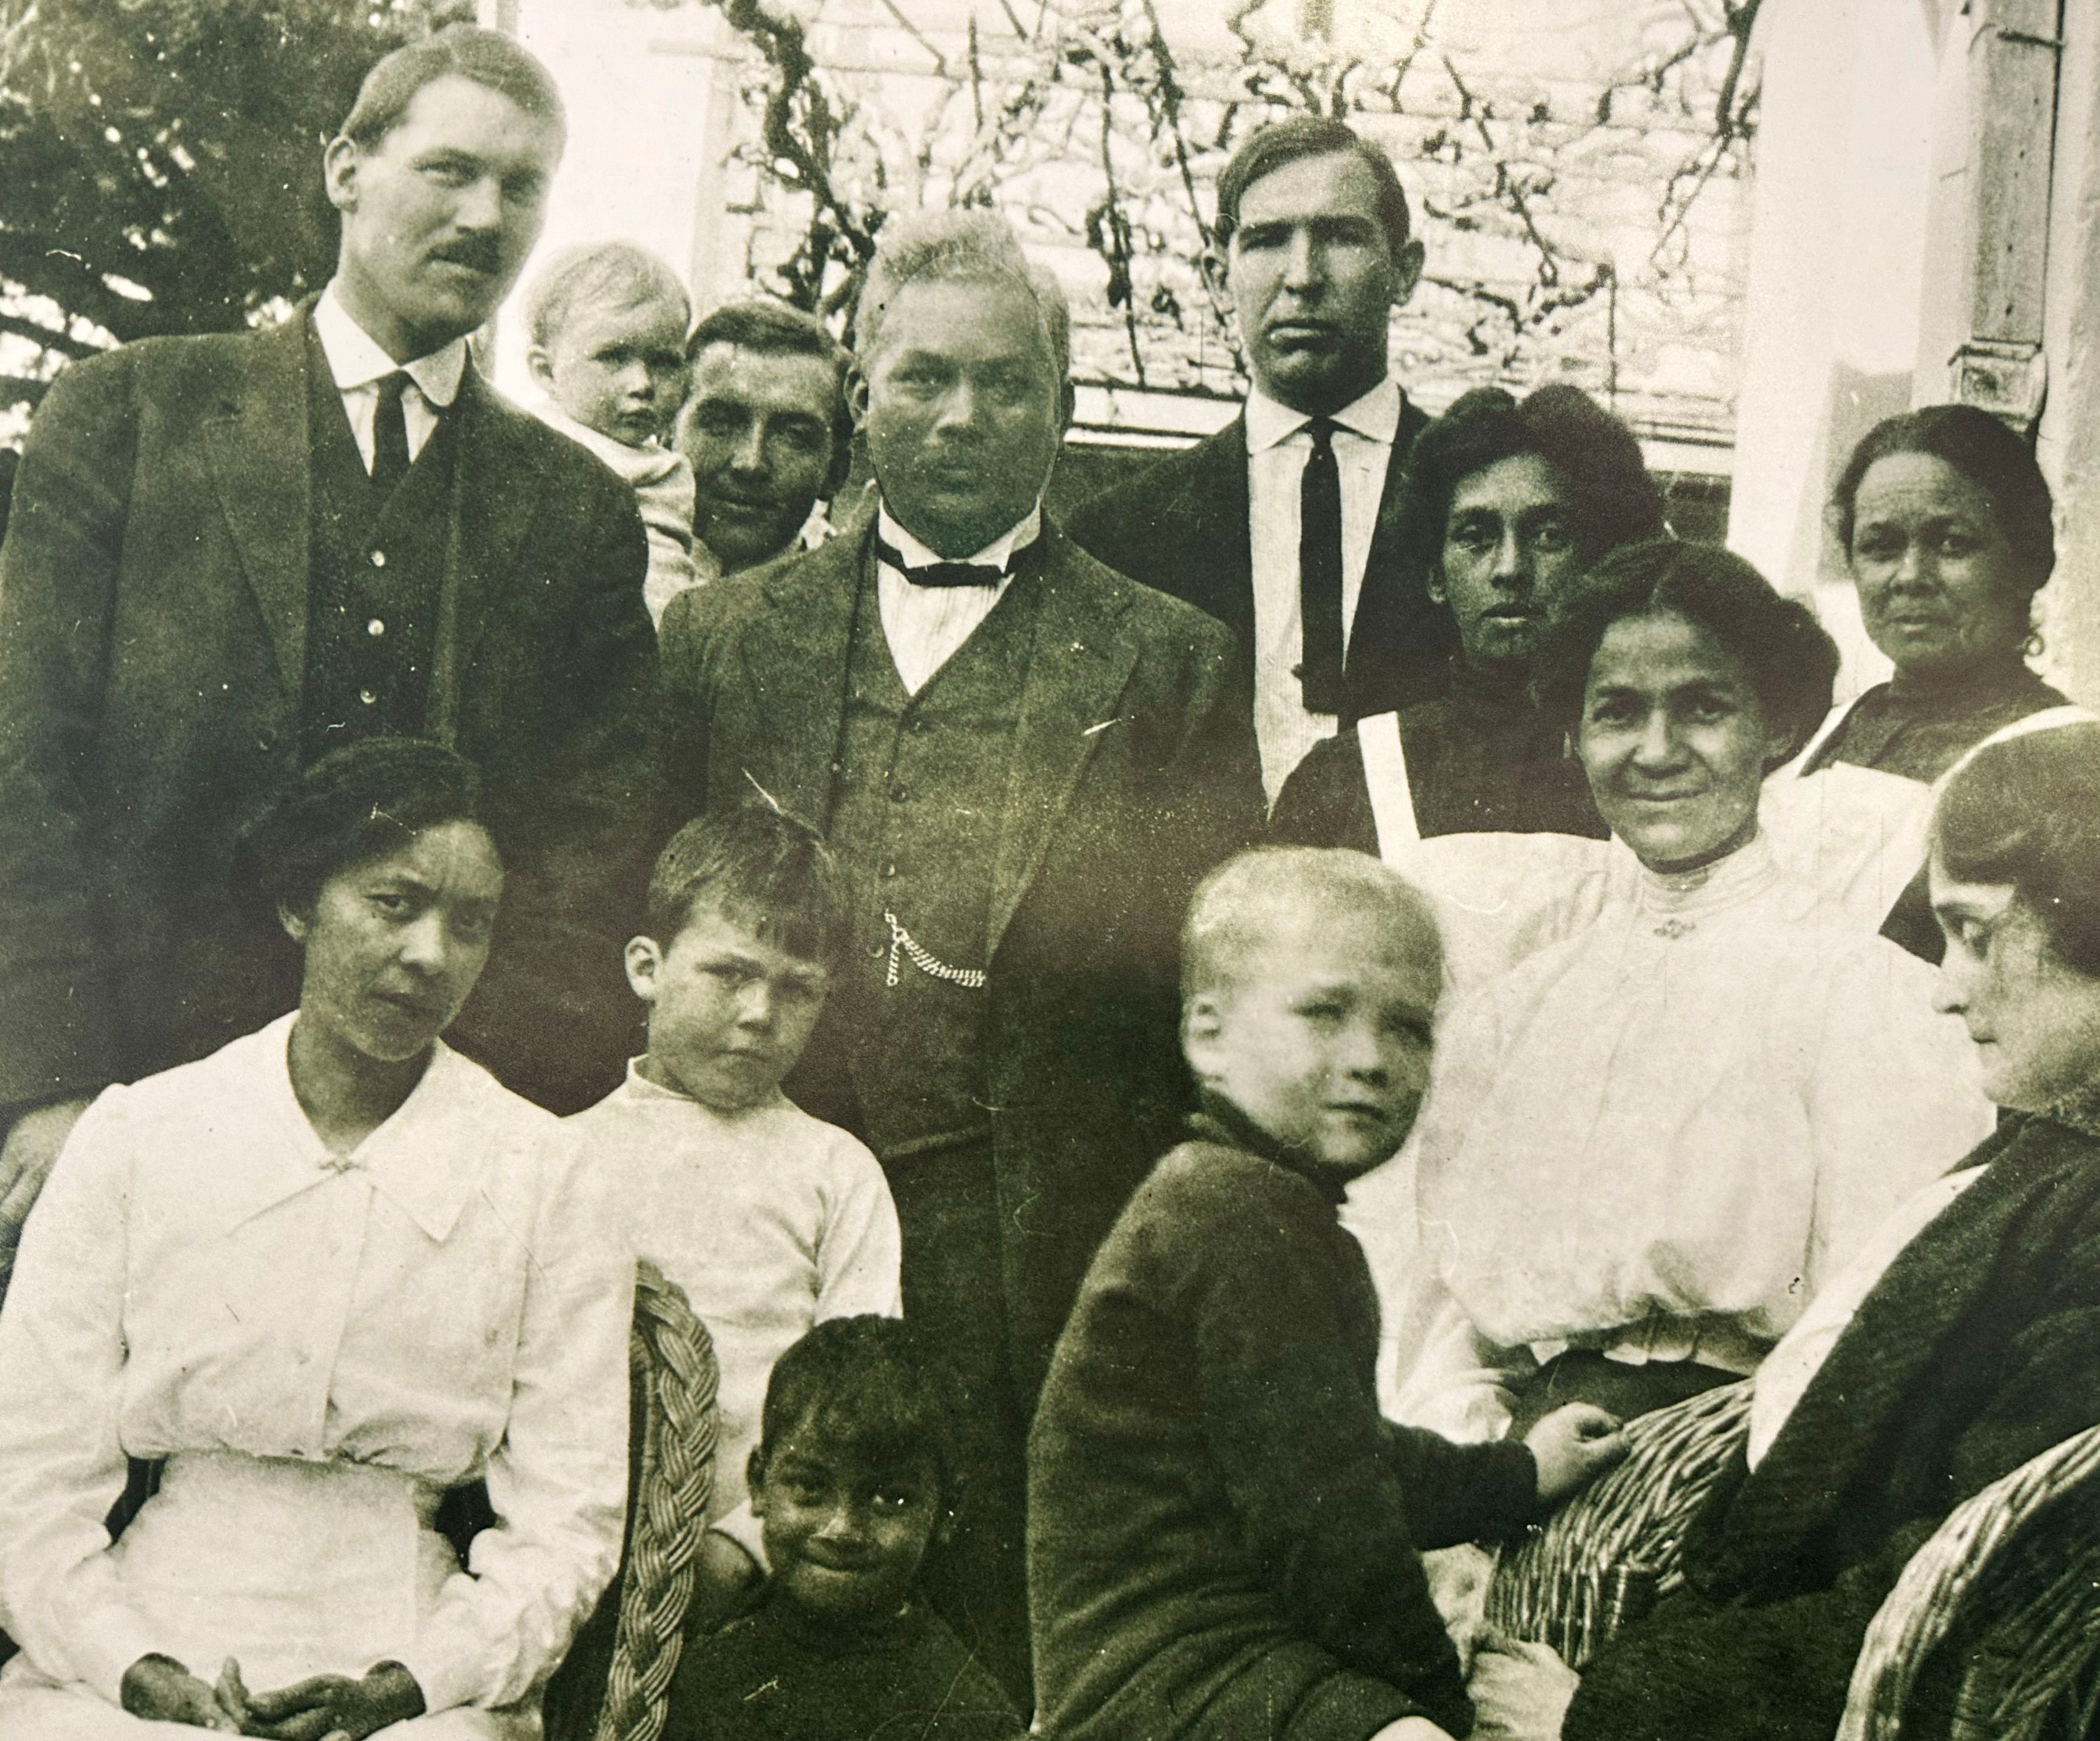 Black and white photo of members of the Daniels family and missionaires standing together for a photo, capturing the history of Black saints in The Church of Jesus Christ of Latter-day Saints.